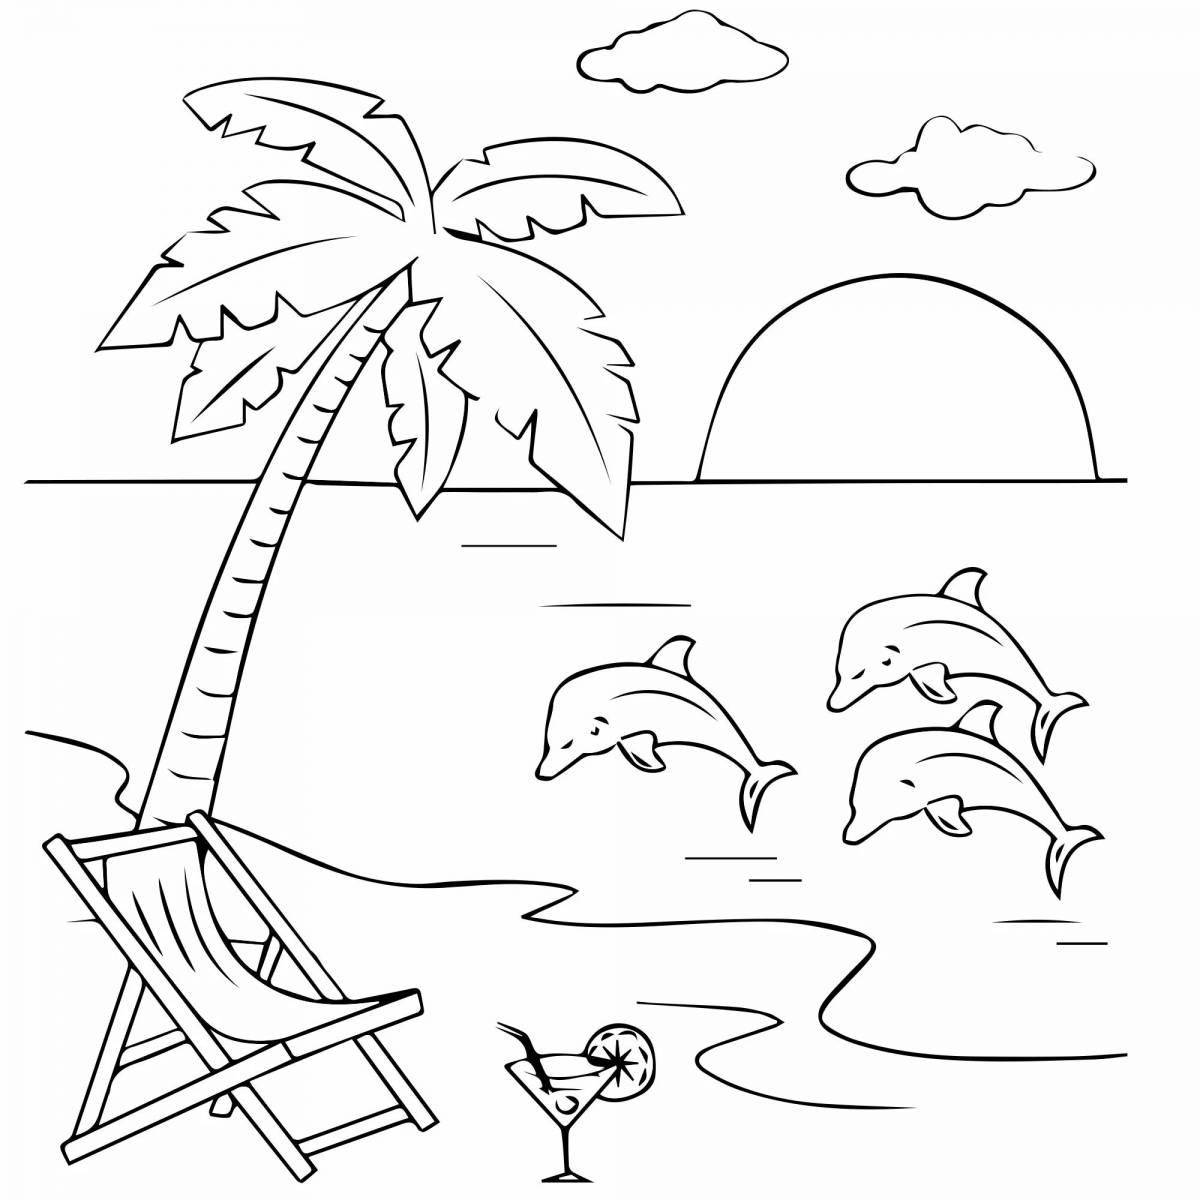 Charming seascape coloring book